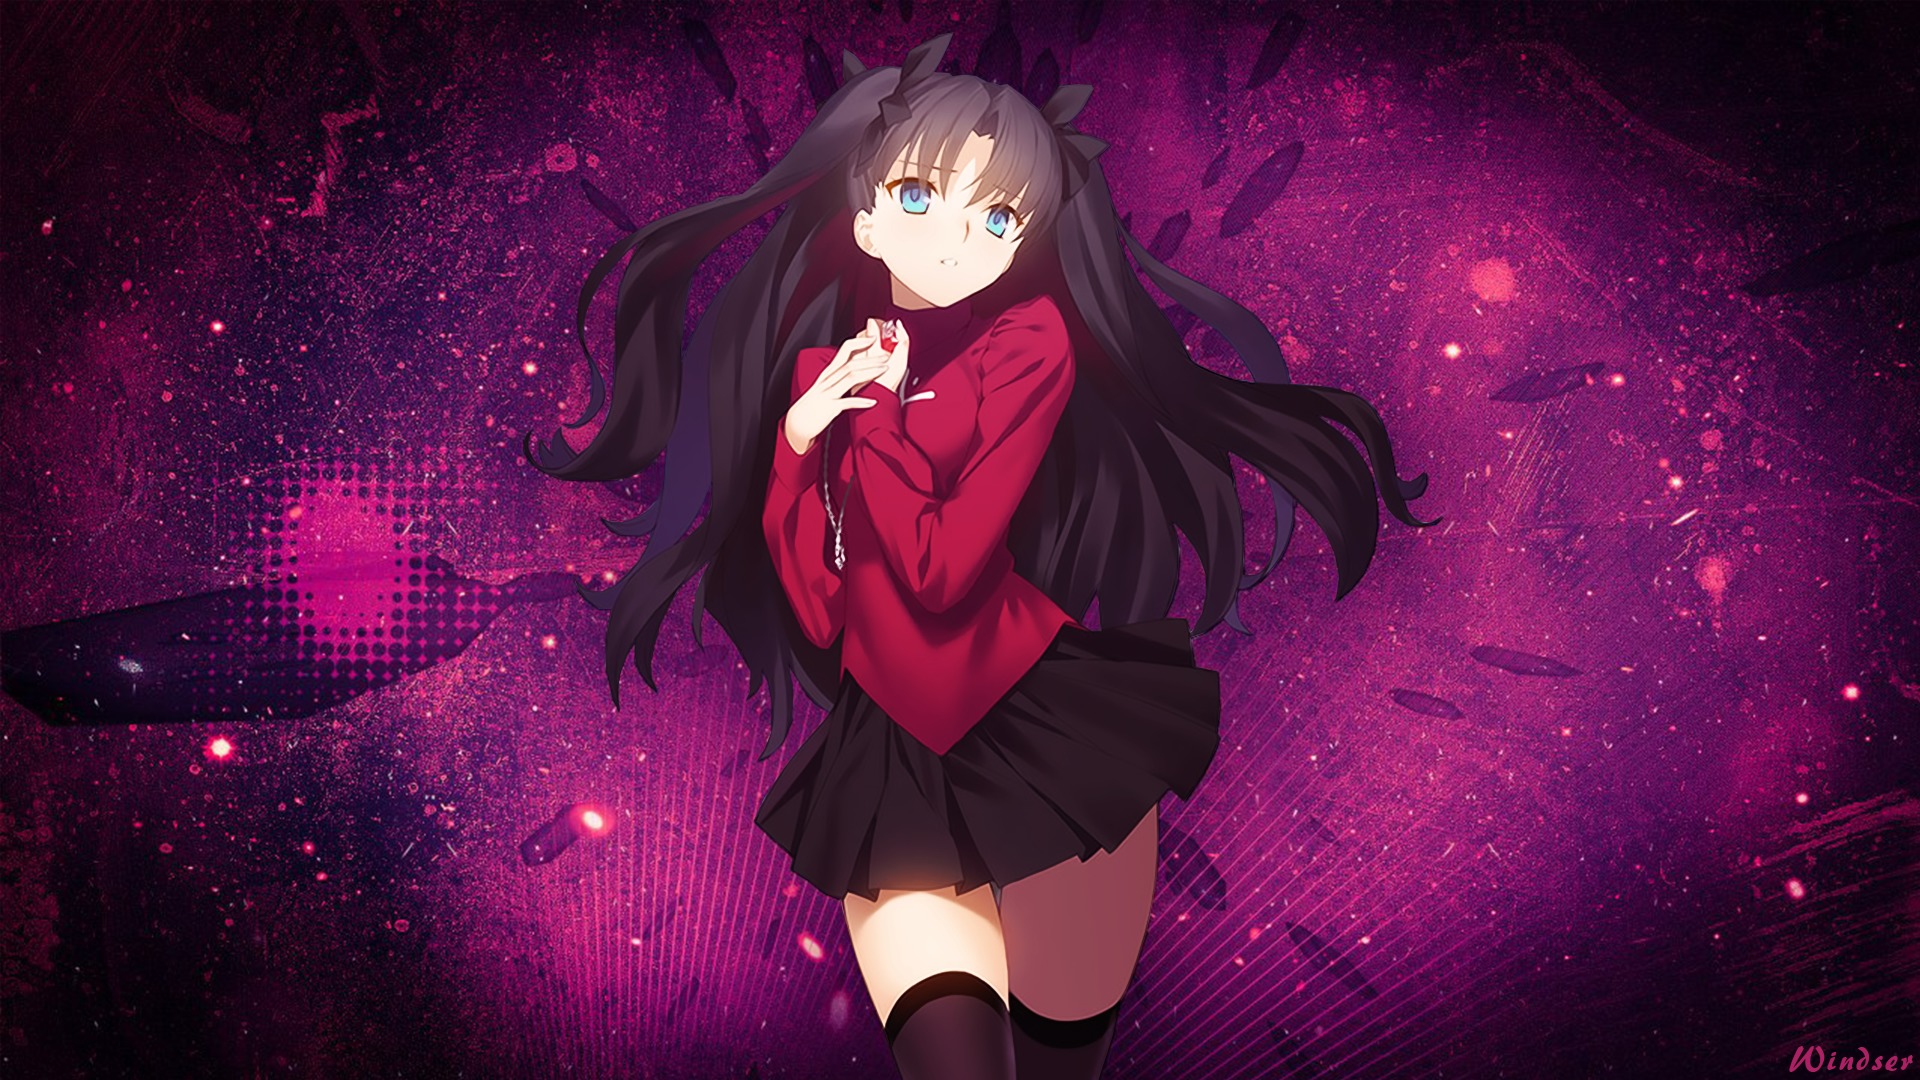 5. "Rin Tohsaka" from the anime "Fate/stay night" - wide 2